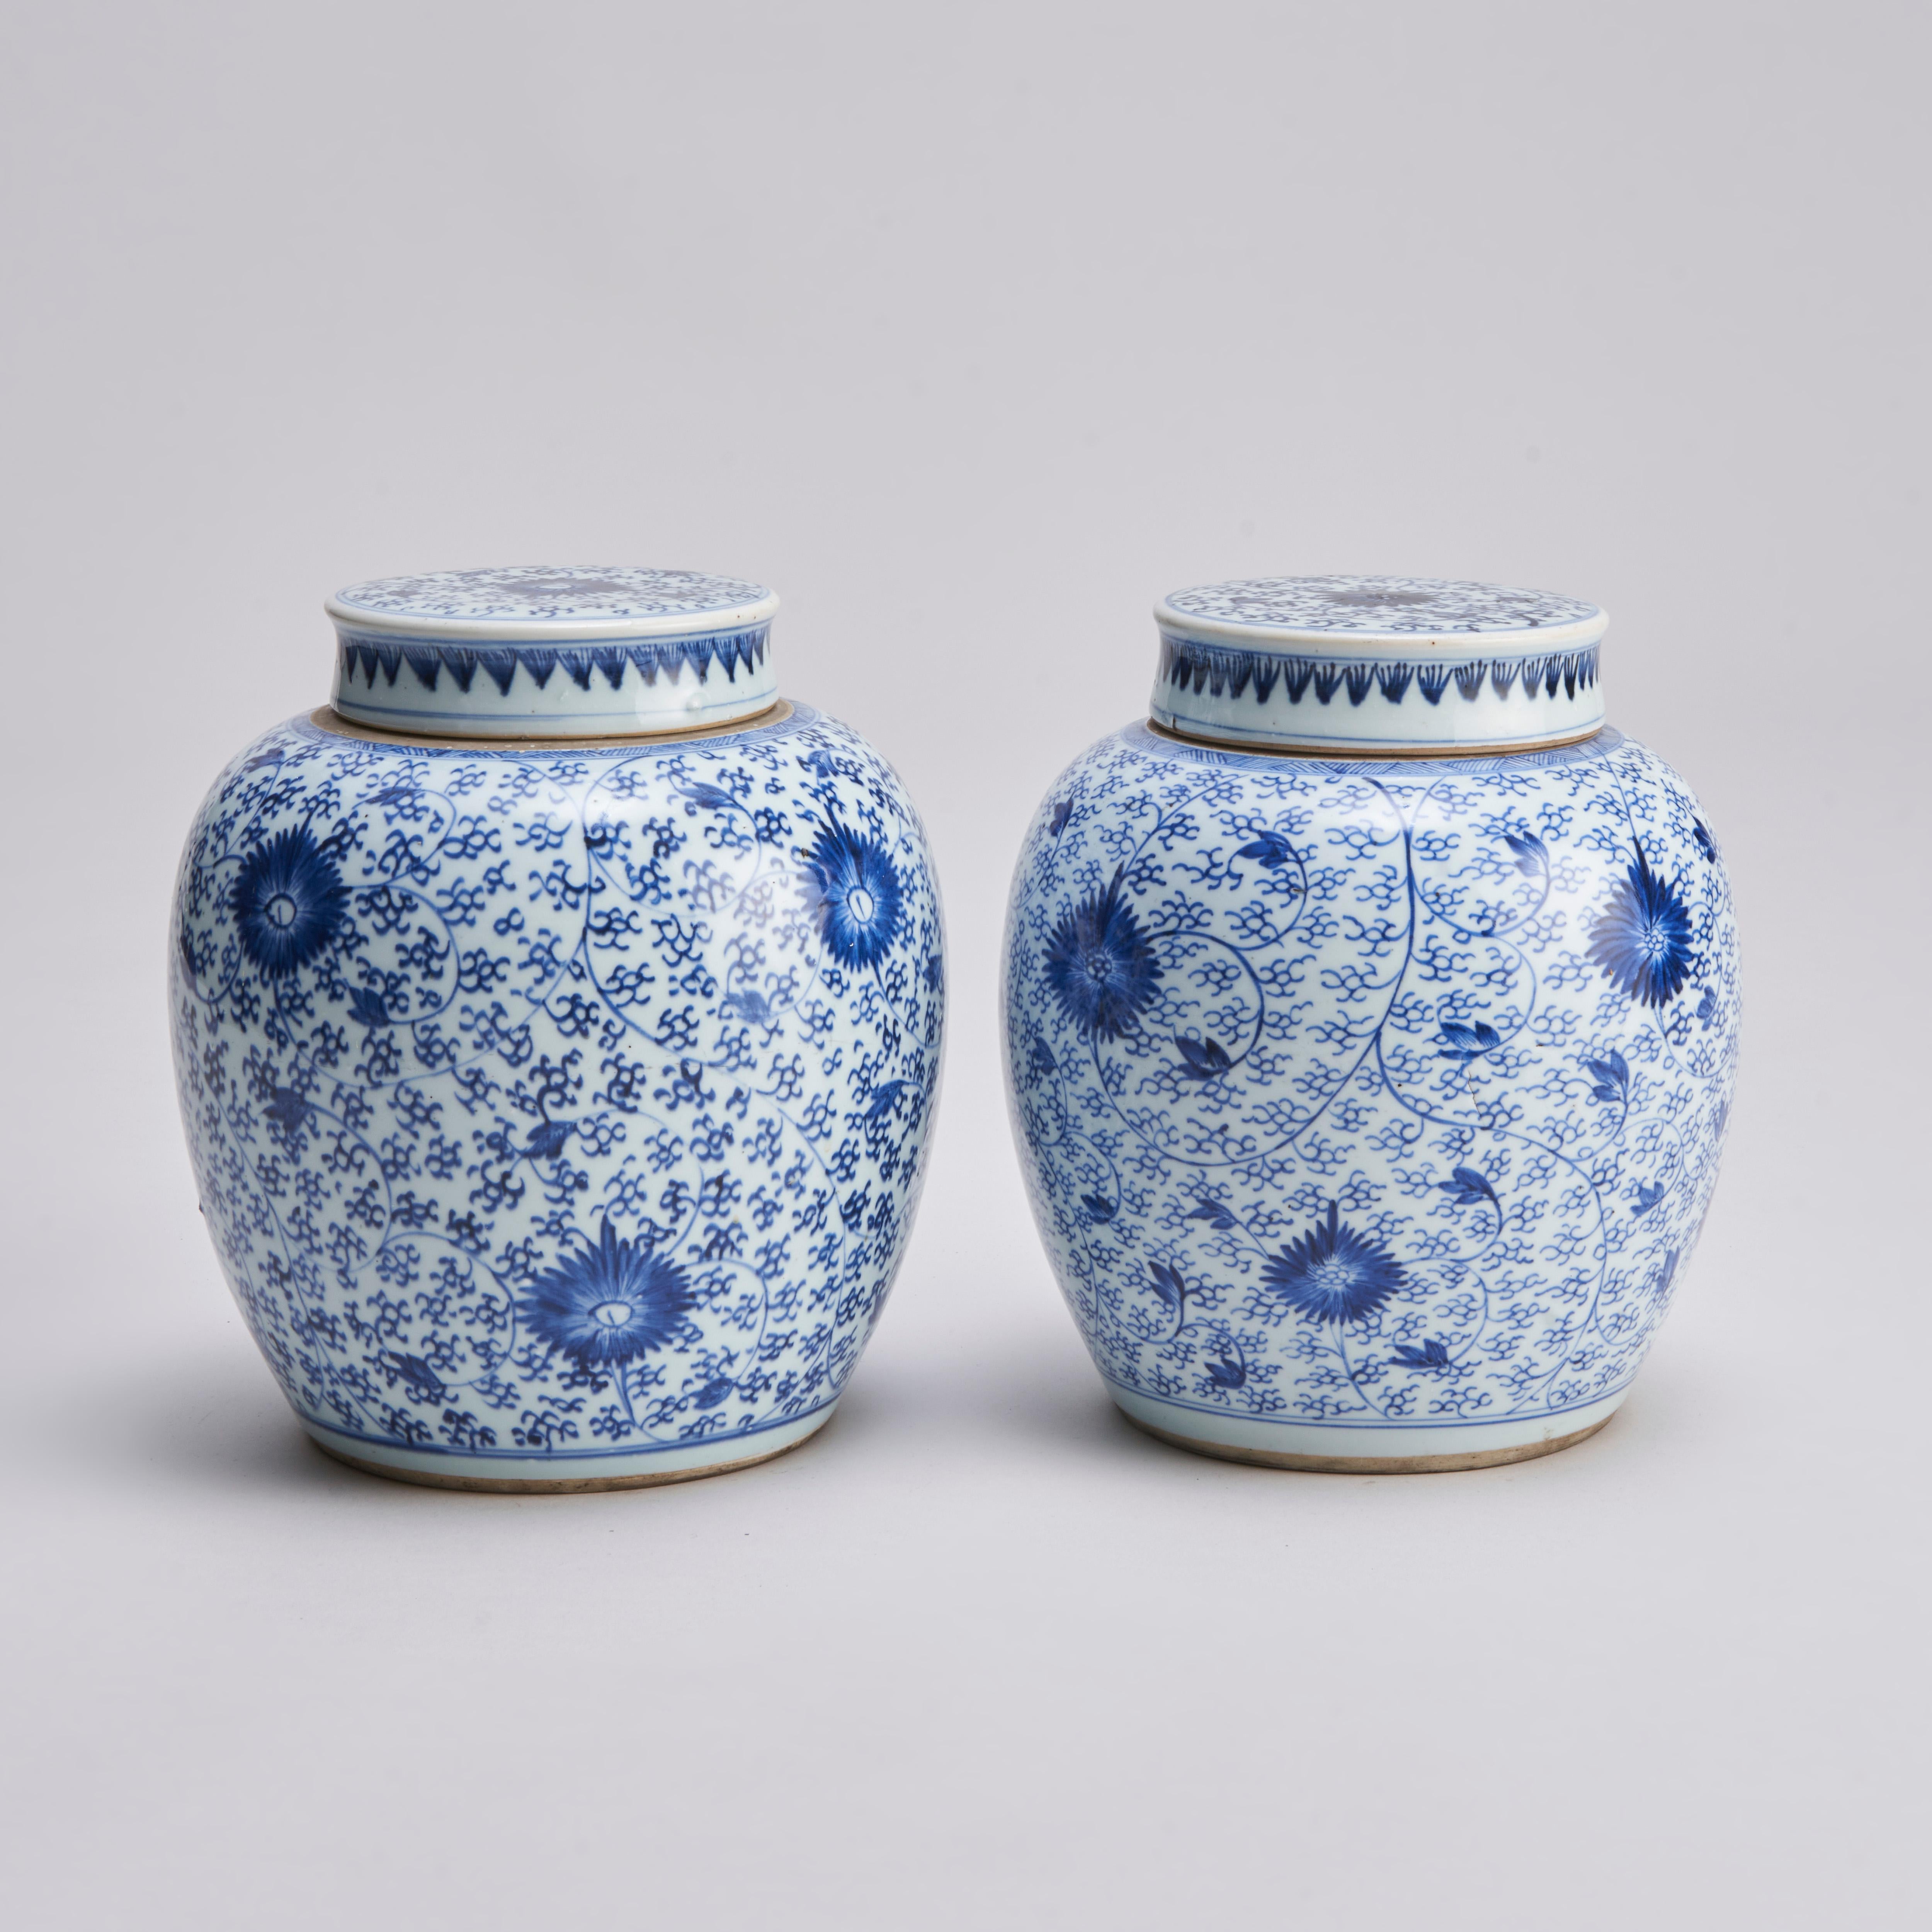 From our collection of antique Chinese porcelain, this attractive pair of 18th Century (Kang Hsi) ginger jars with original porcelain covers.

The jars decorated with abstract clematis design.

Offered in good condition. Please don’t hesitate to